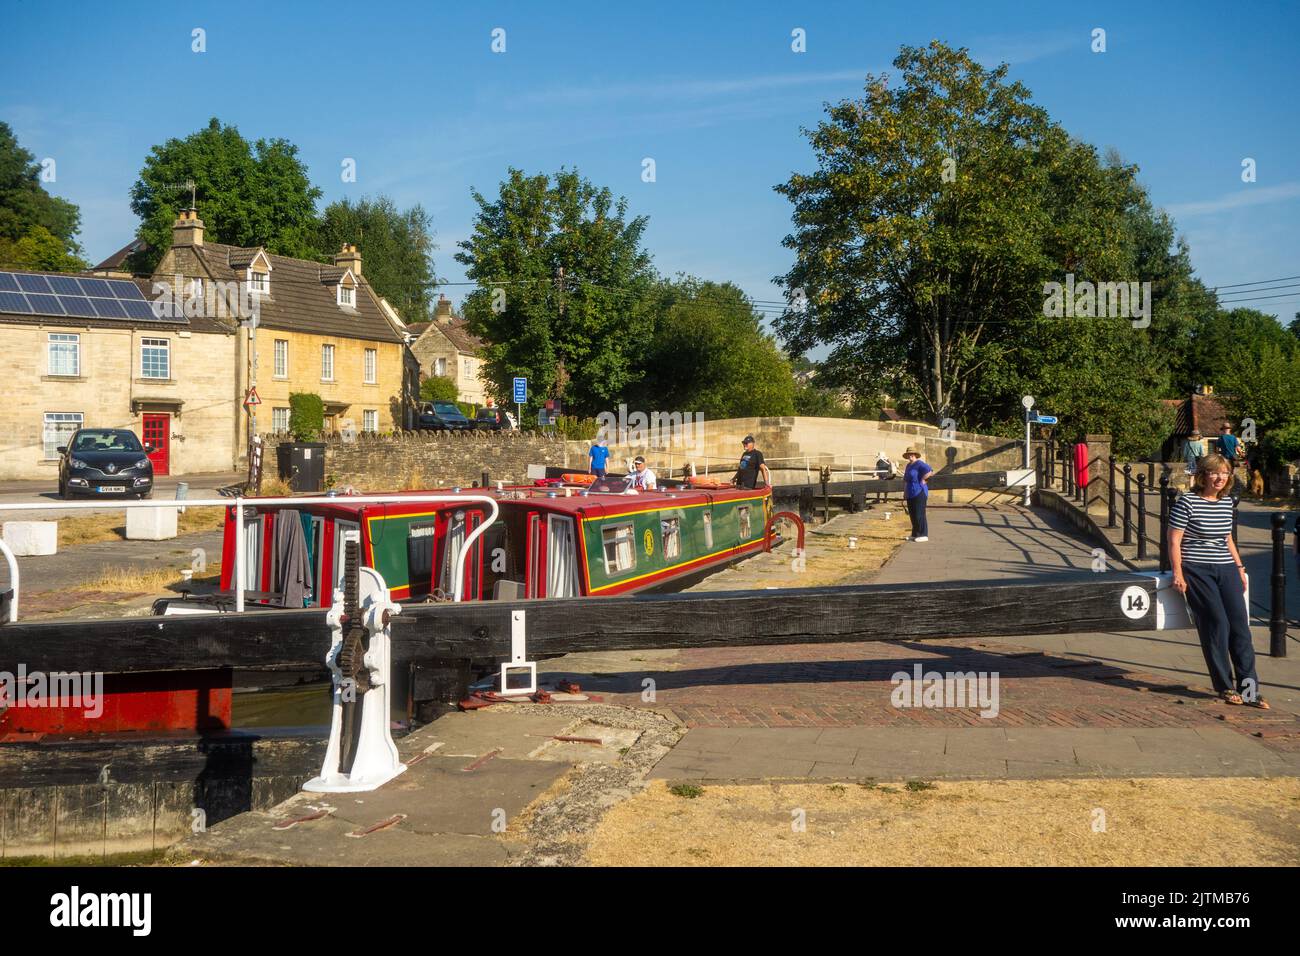 Canal narrowboat passing through Bradford locks on the Kennet and Avon canal at Bradford on Avon Wiltshire Stock Photo